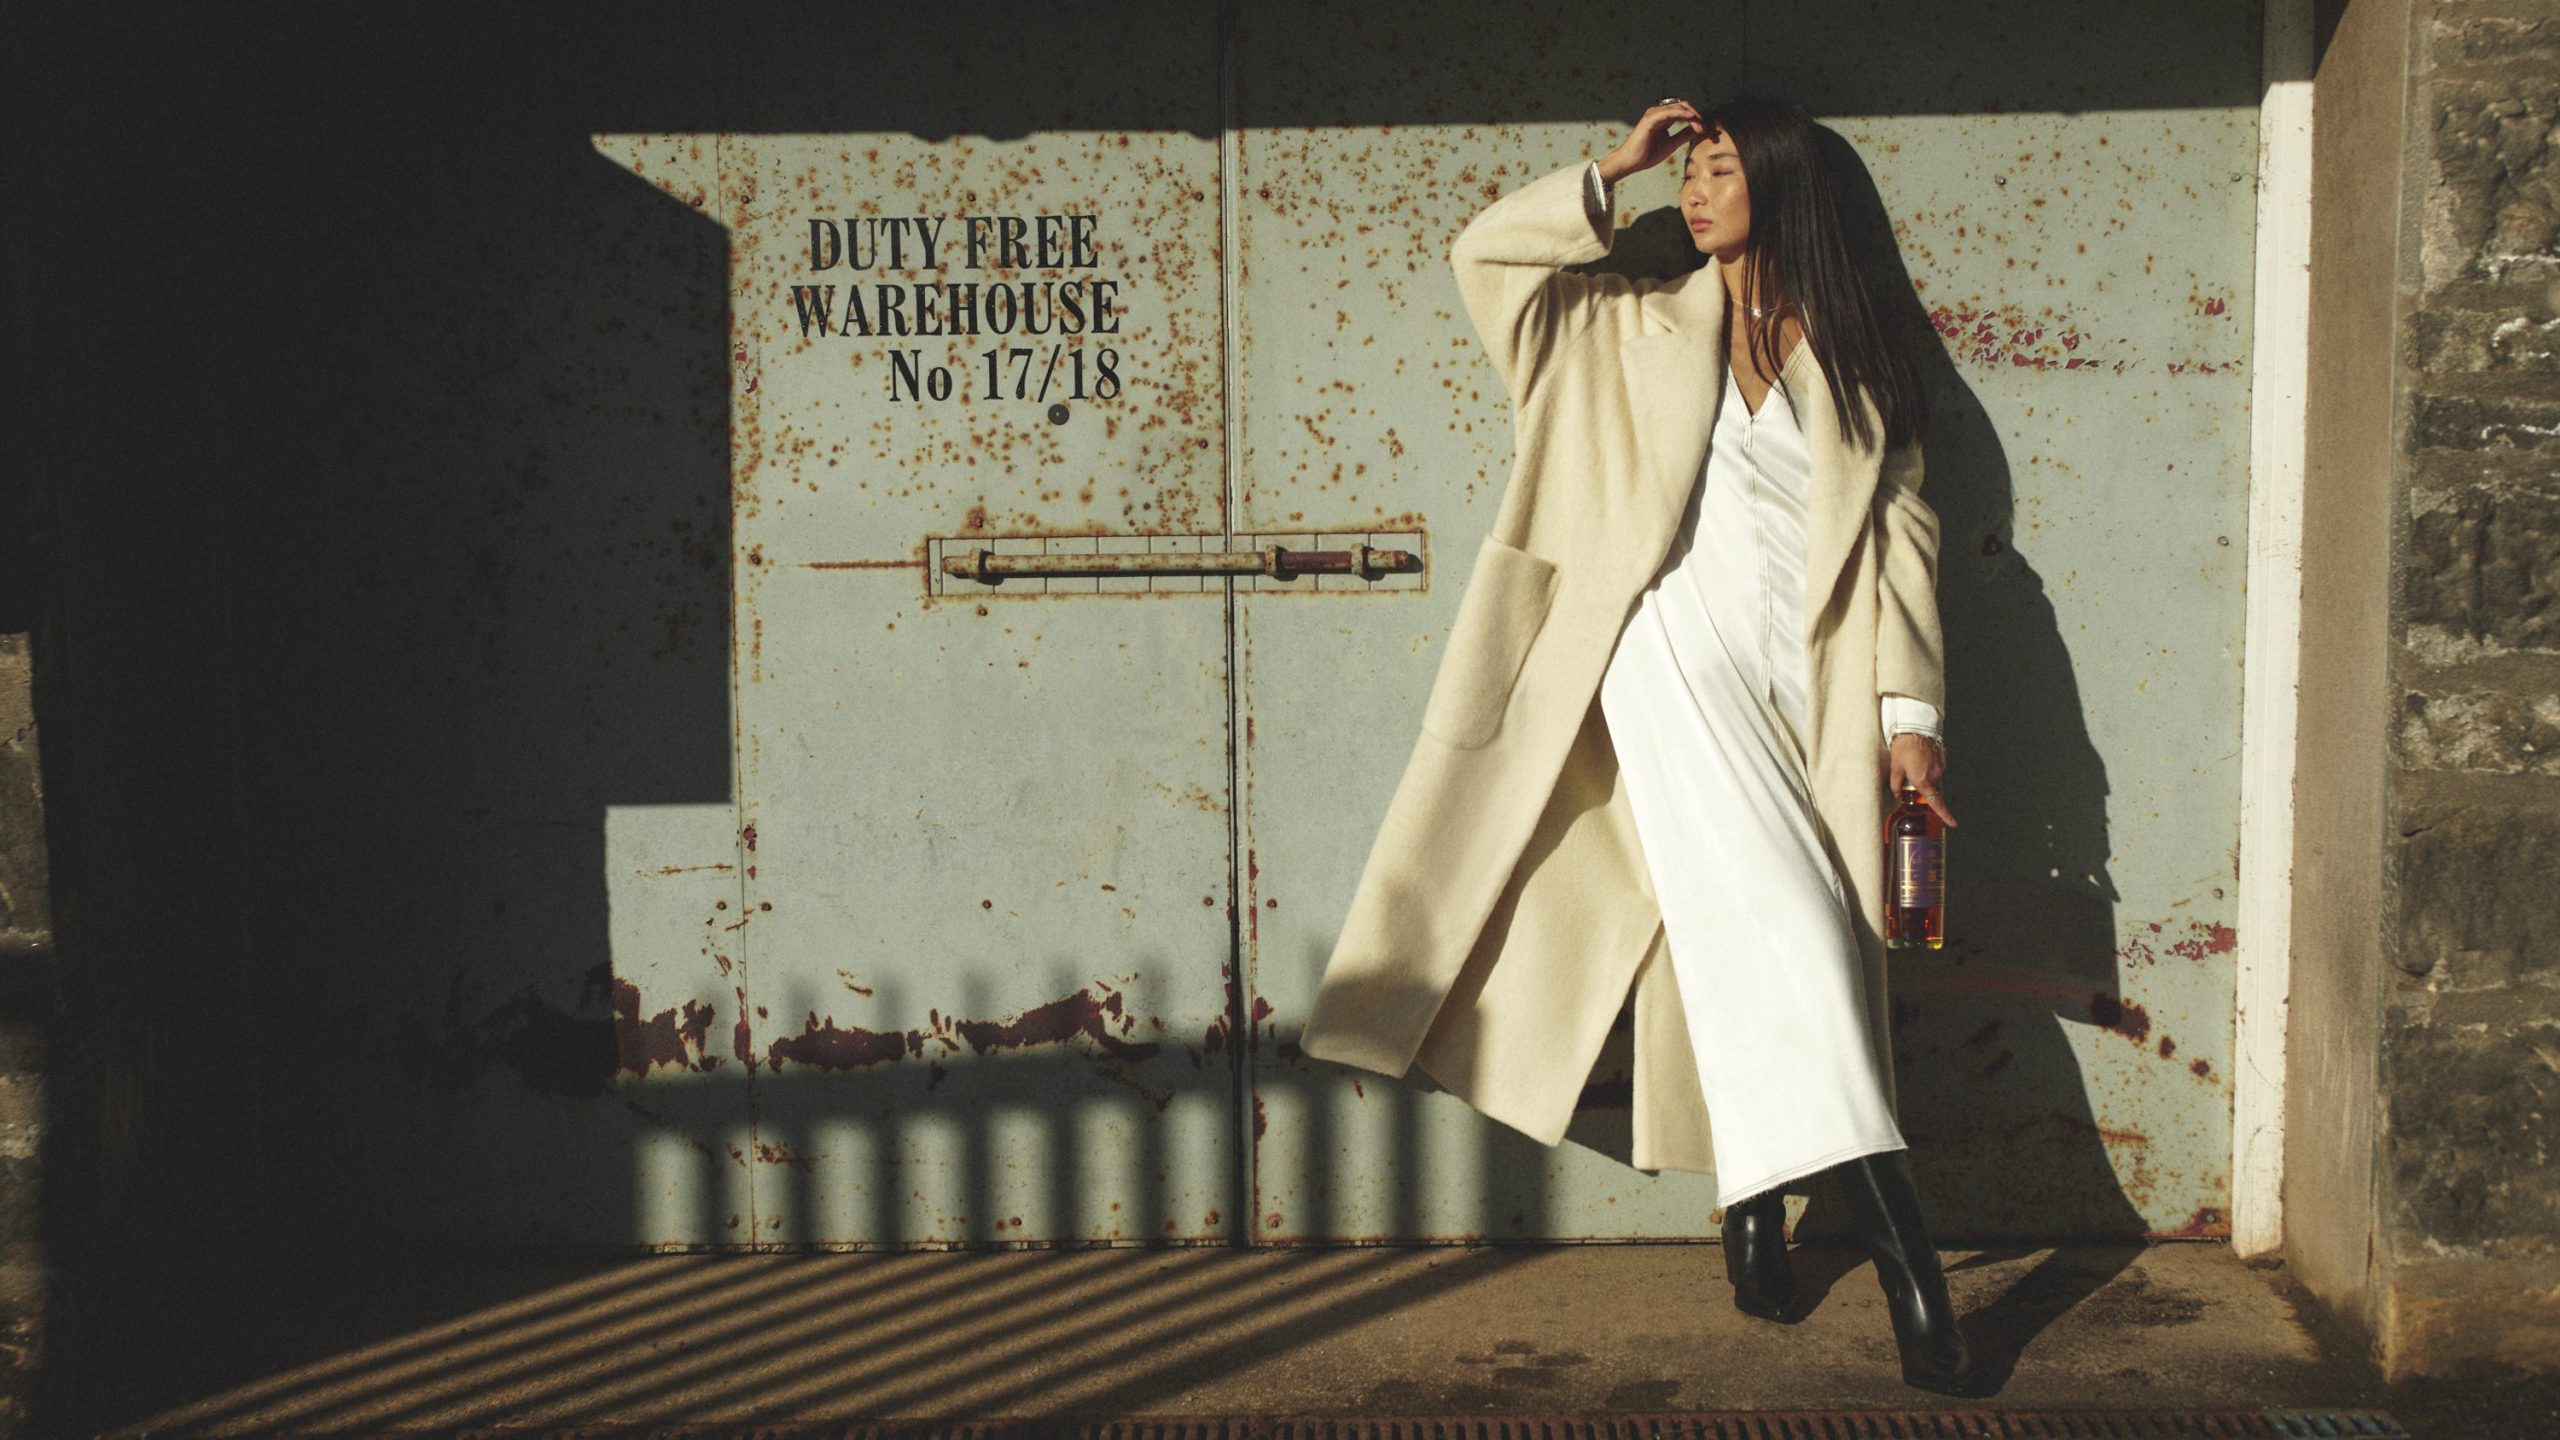 A woman standing in front of a warehouse door holding a bottle of 22 Year Old Longmorn Whisky